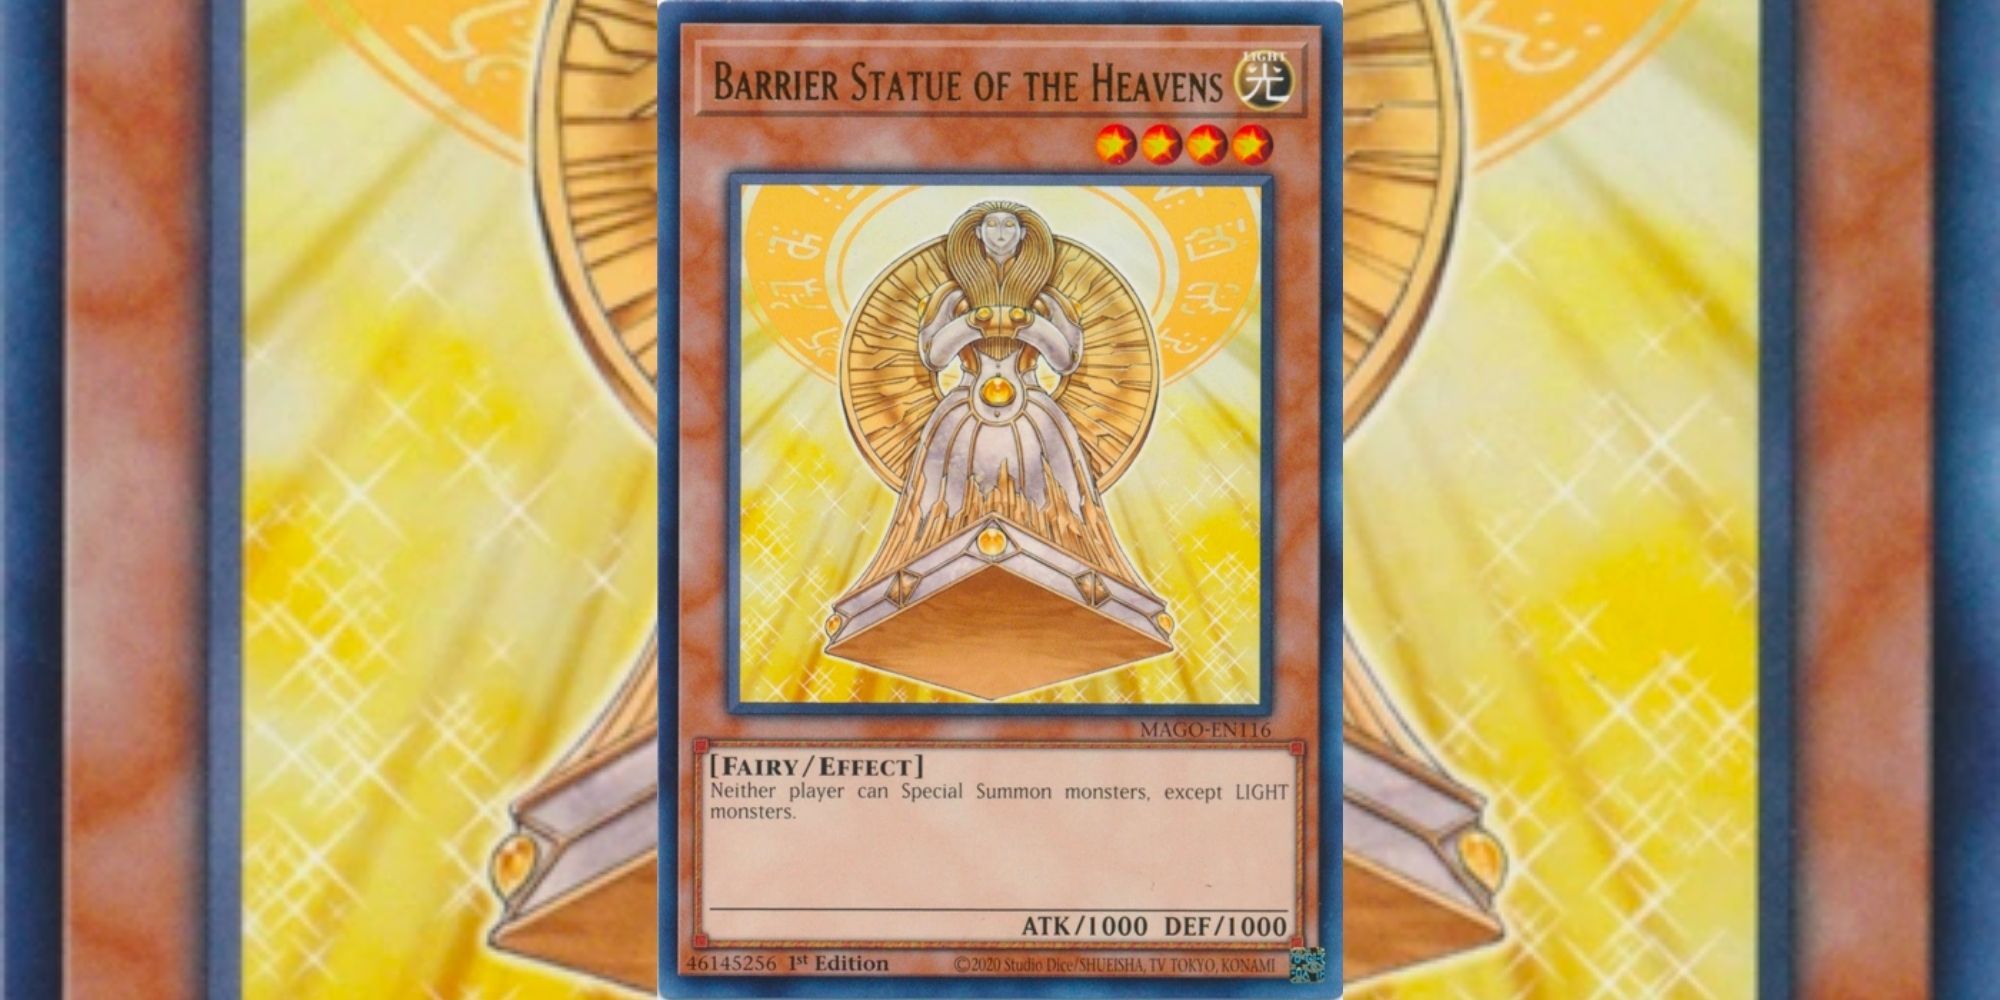 Barrier Statue of the Heavens card in Yu-Gi-Oh!